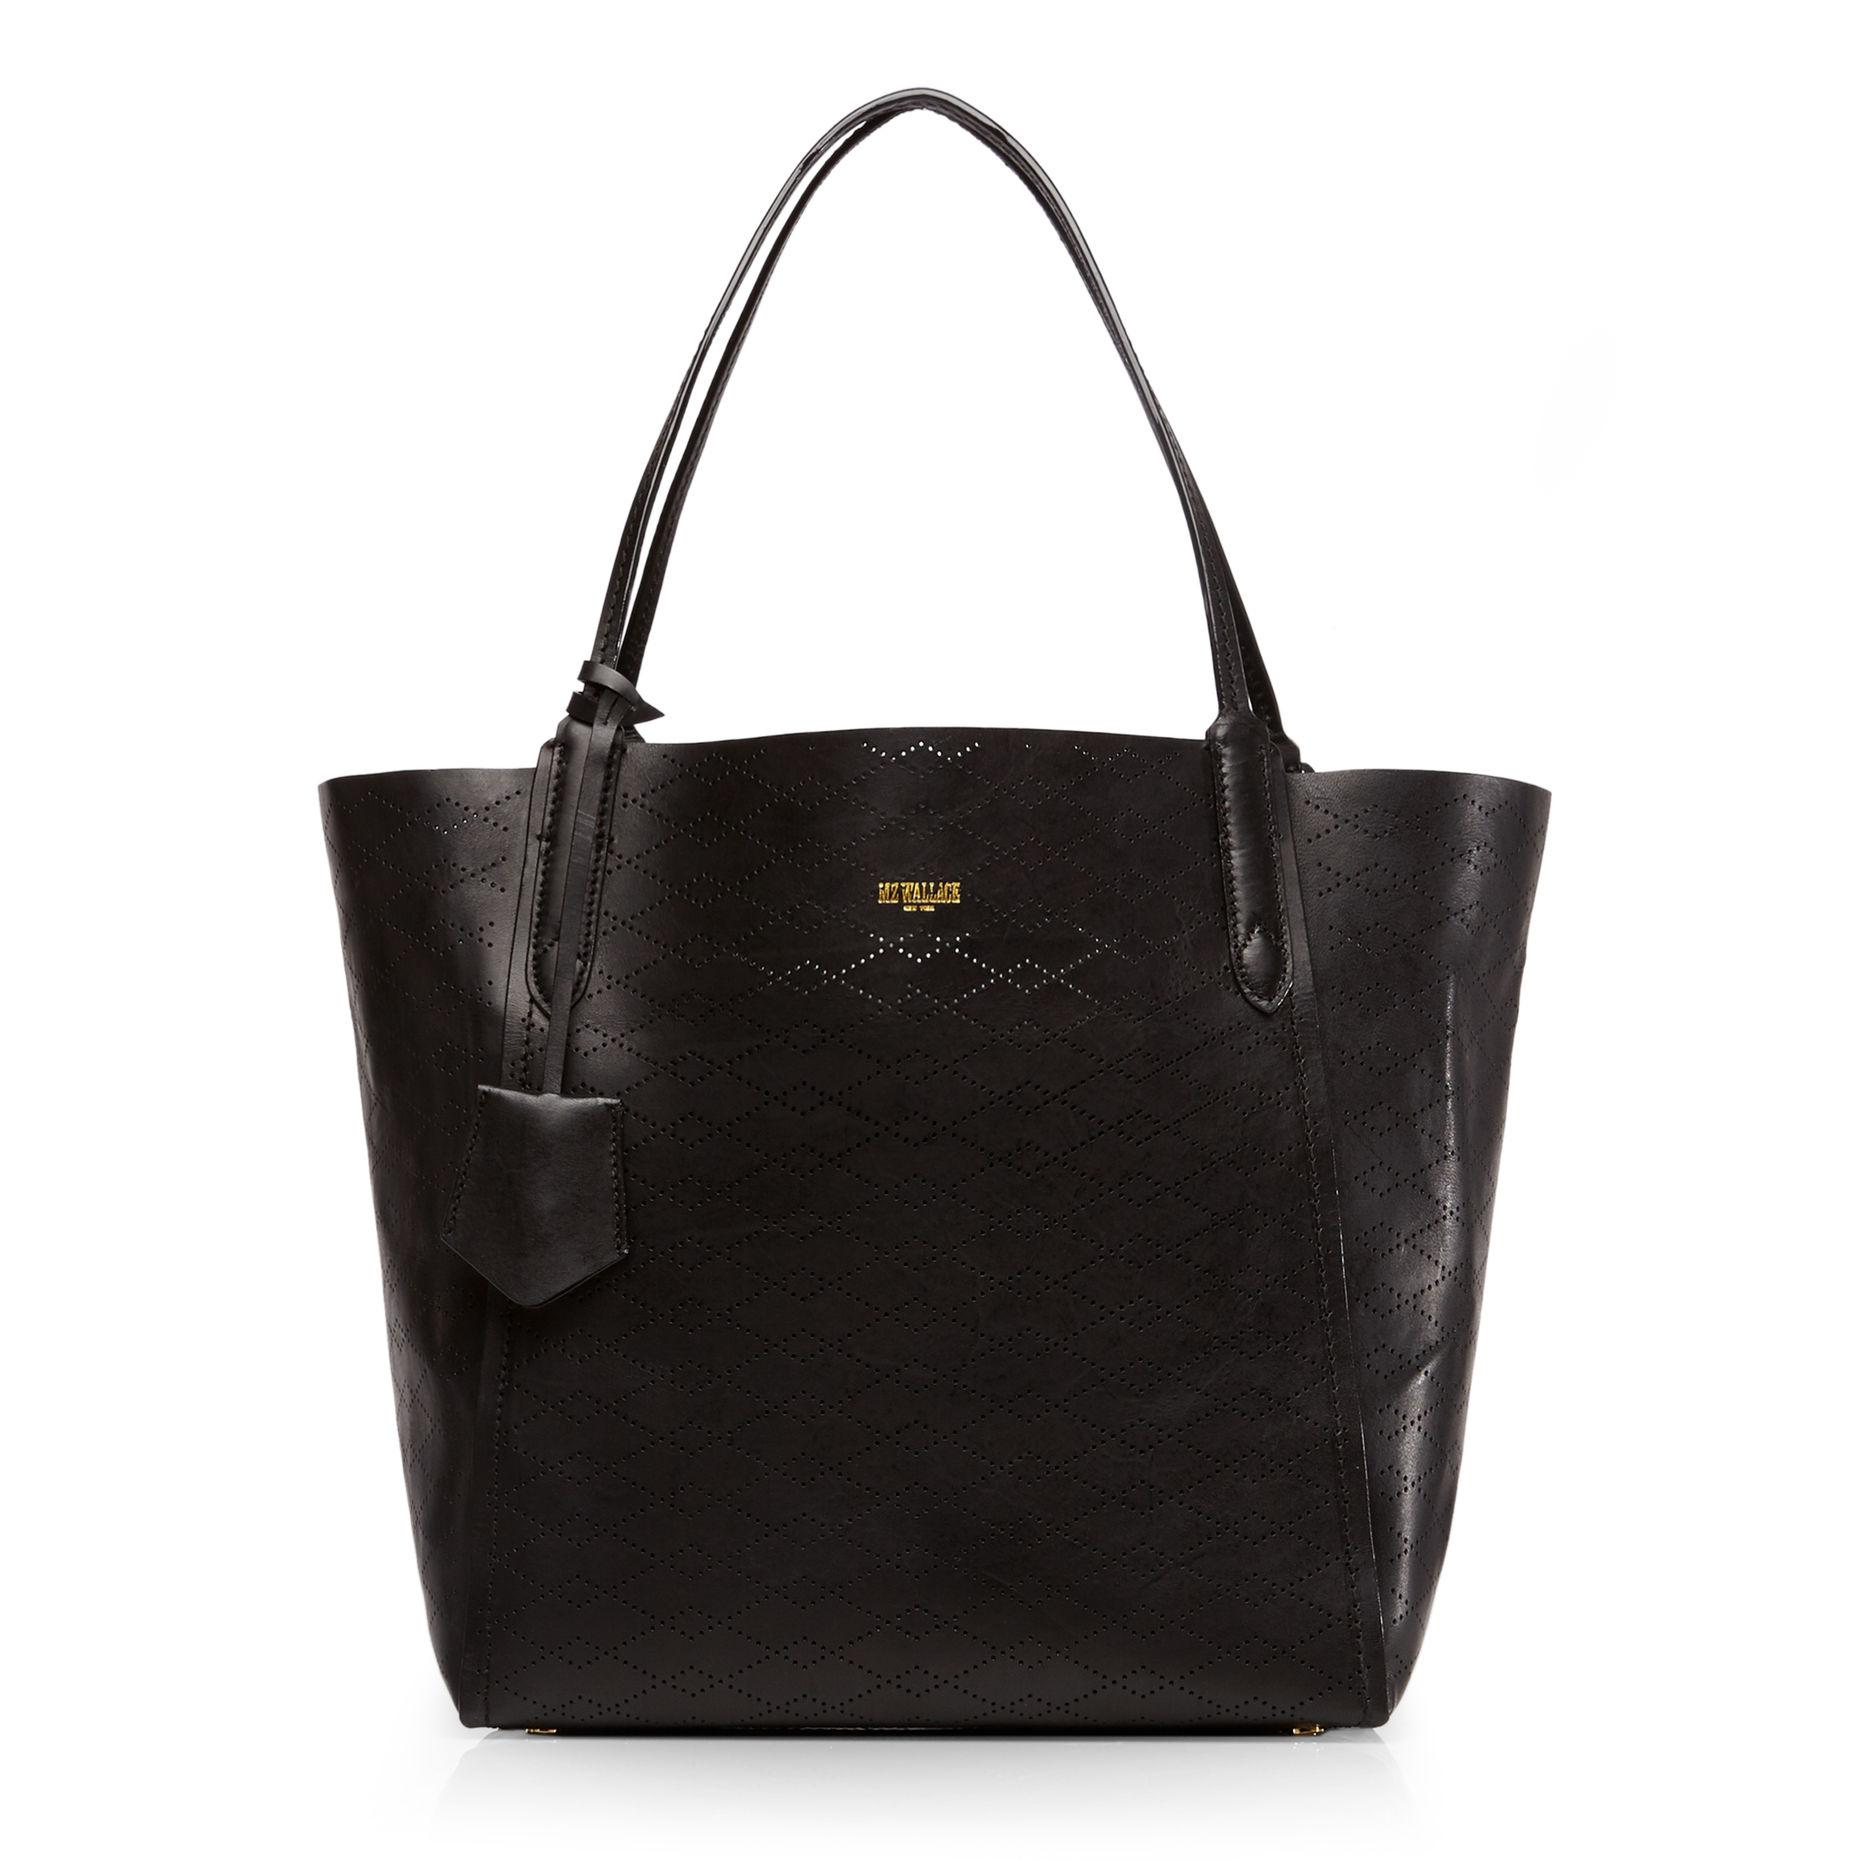 MZ Wallace Leather Venice Tote in Black - Lyst